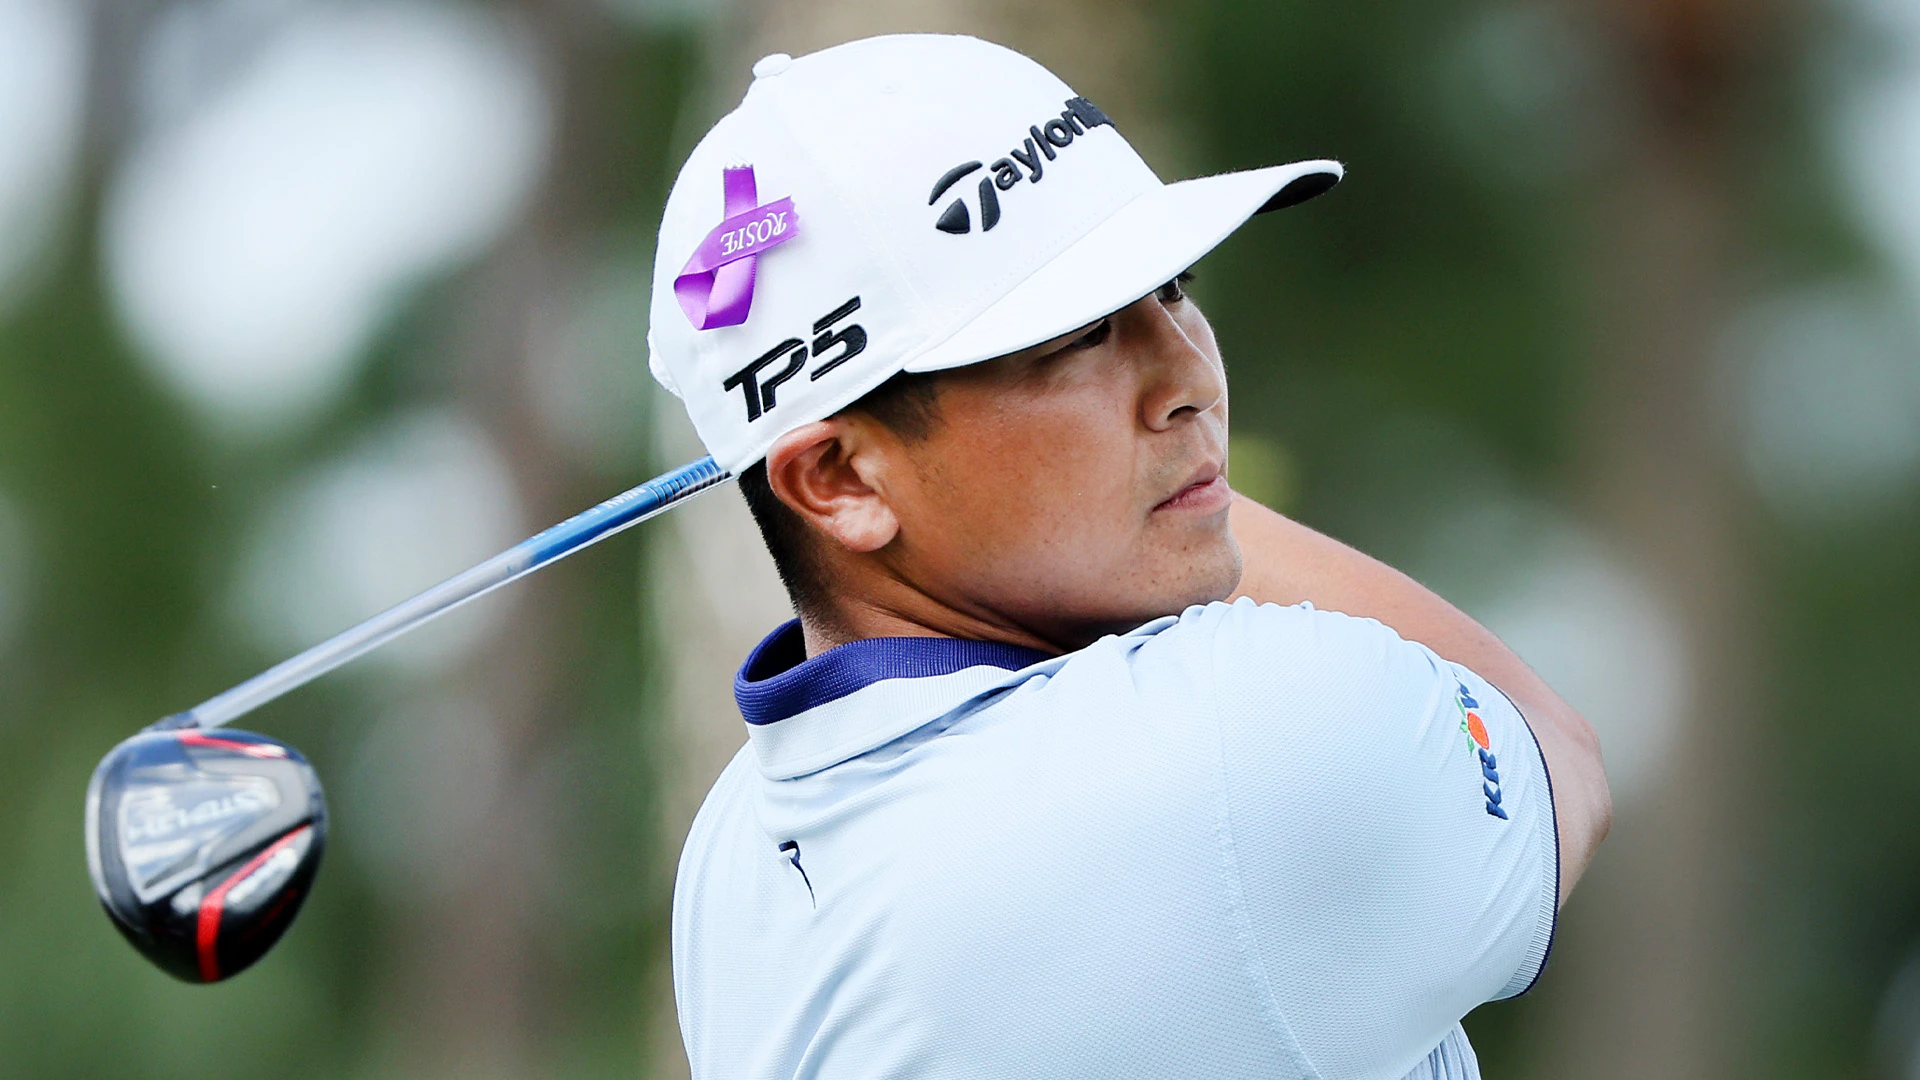 World No. 289 Kurt Kitayama comes out of nowhere, leads Honda Classic after Rd. 1